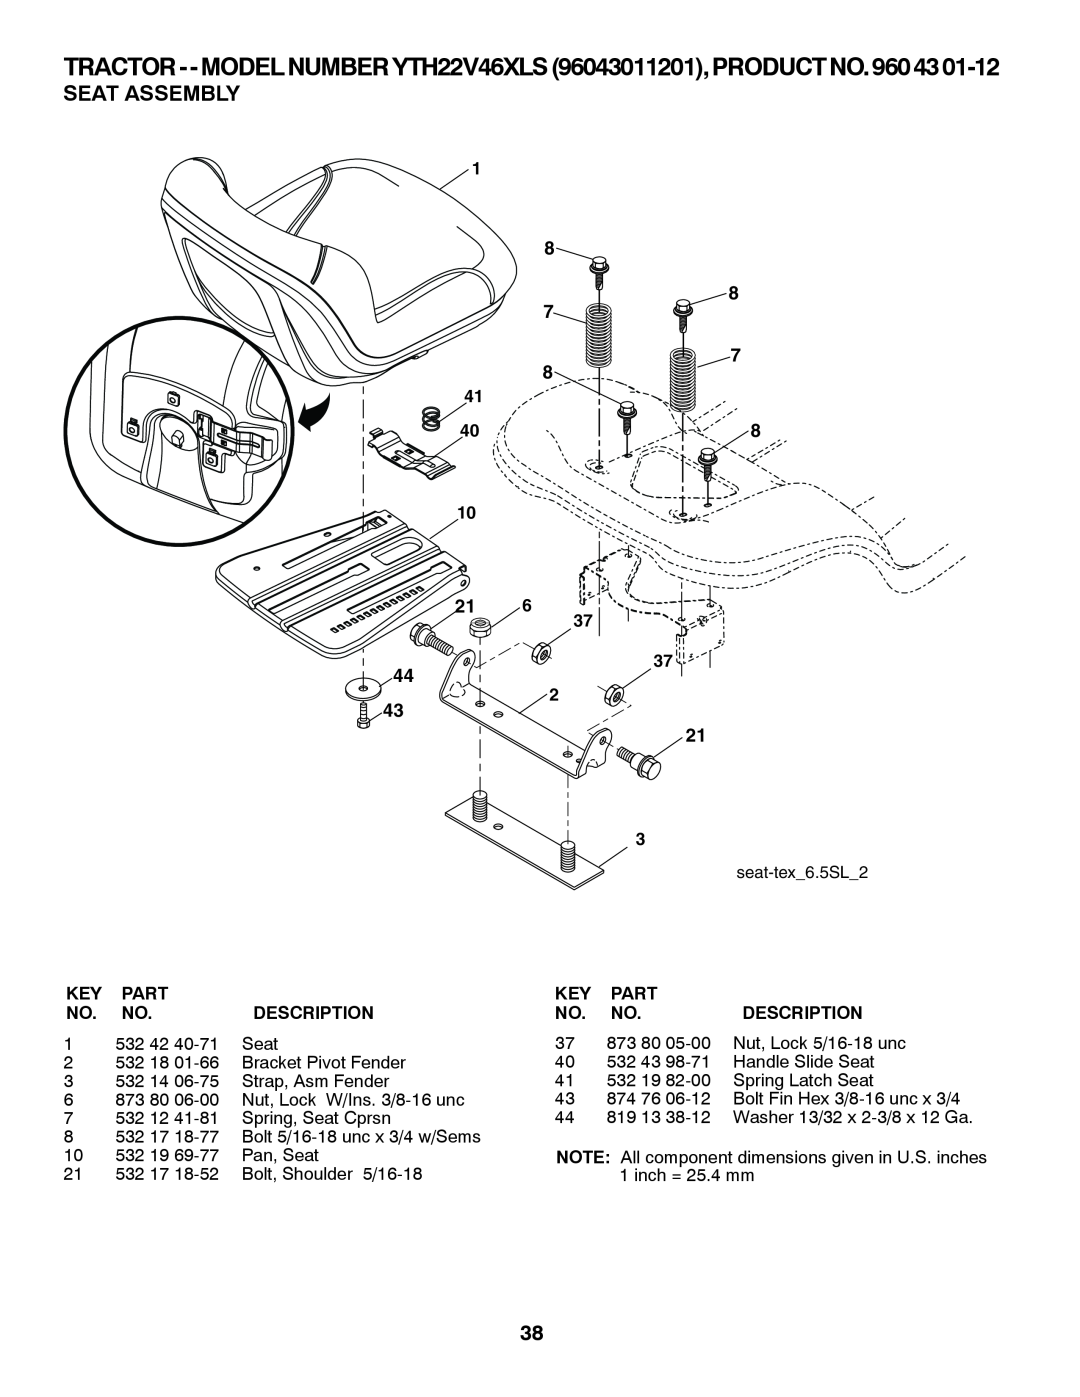 Husqvarna owner manual Seat Assembly, TRACTOR--MODELNUMBERYTH22V46XLS96043011201,PRODUCTNO.9604301-12 